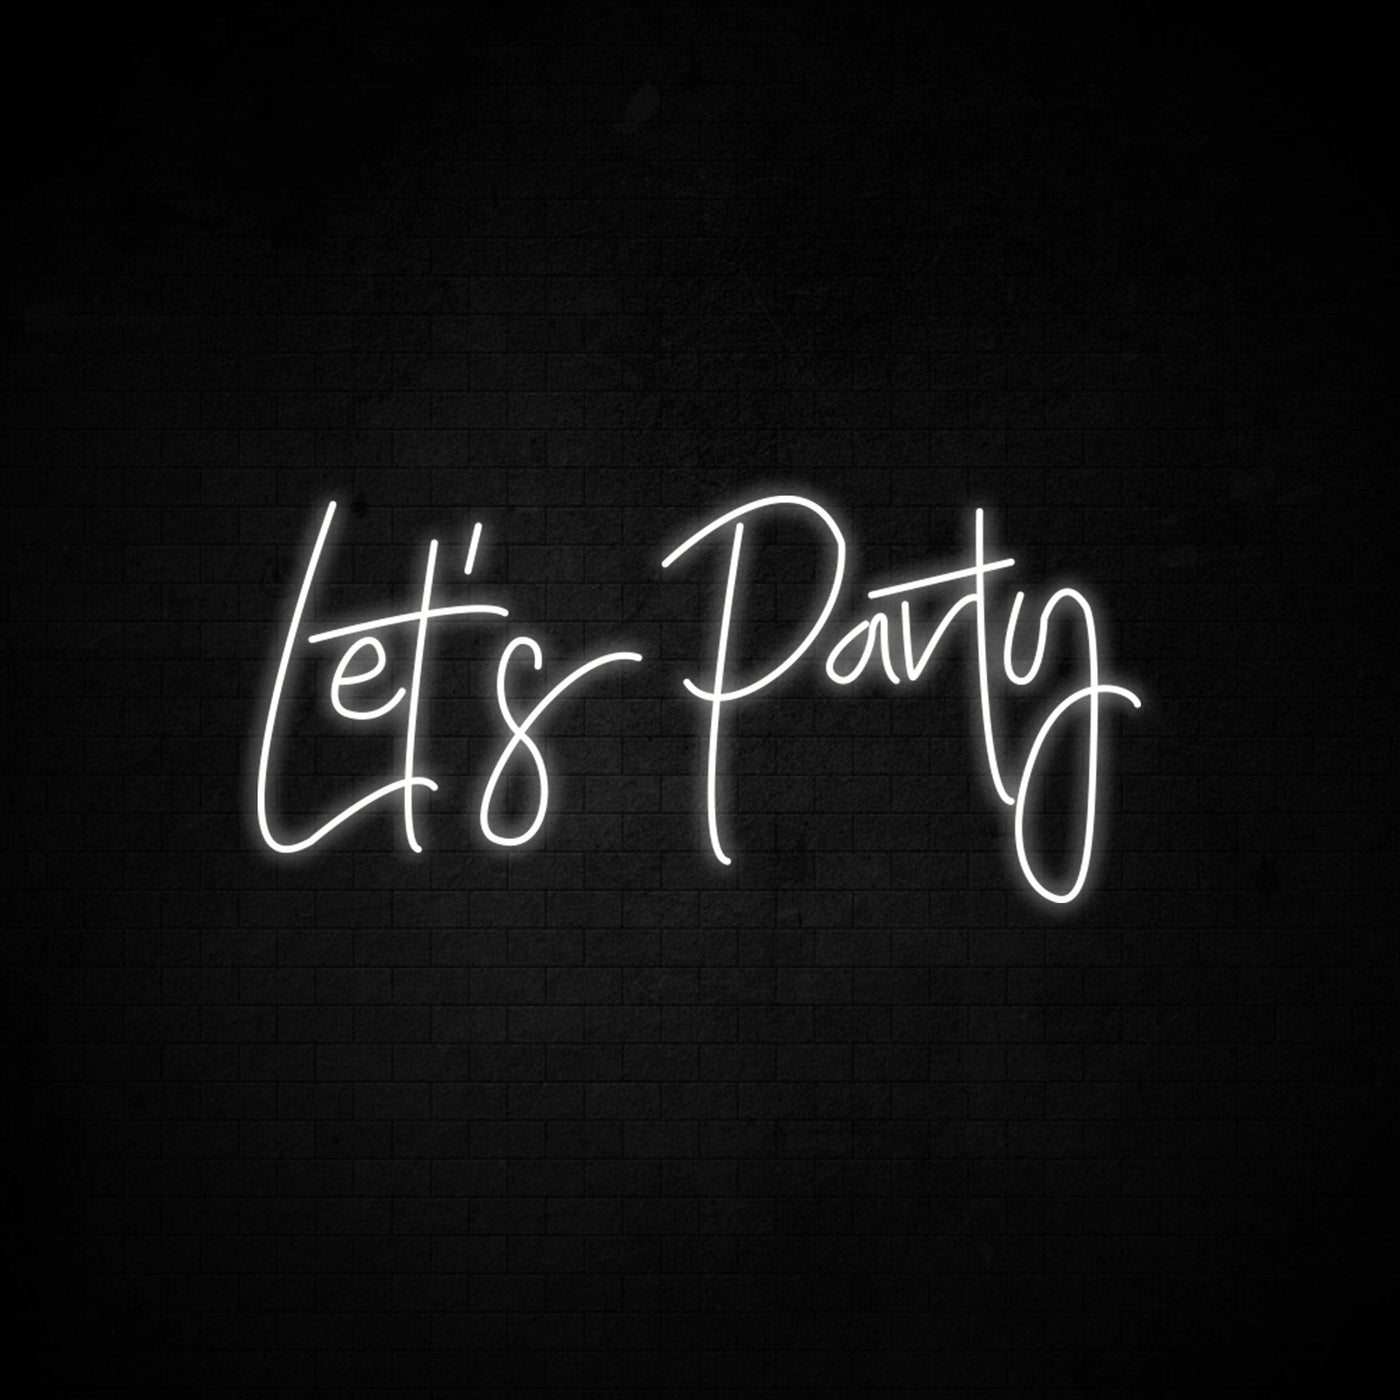 Let's Party Neon Signs Led Neon Light Party Lighting